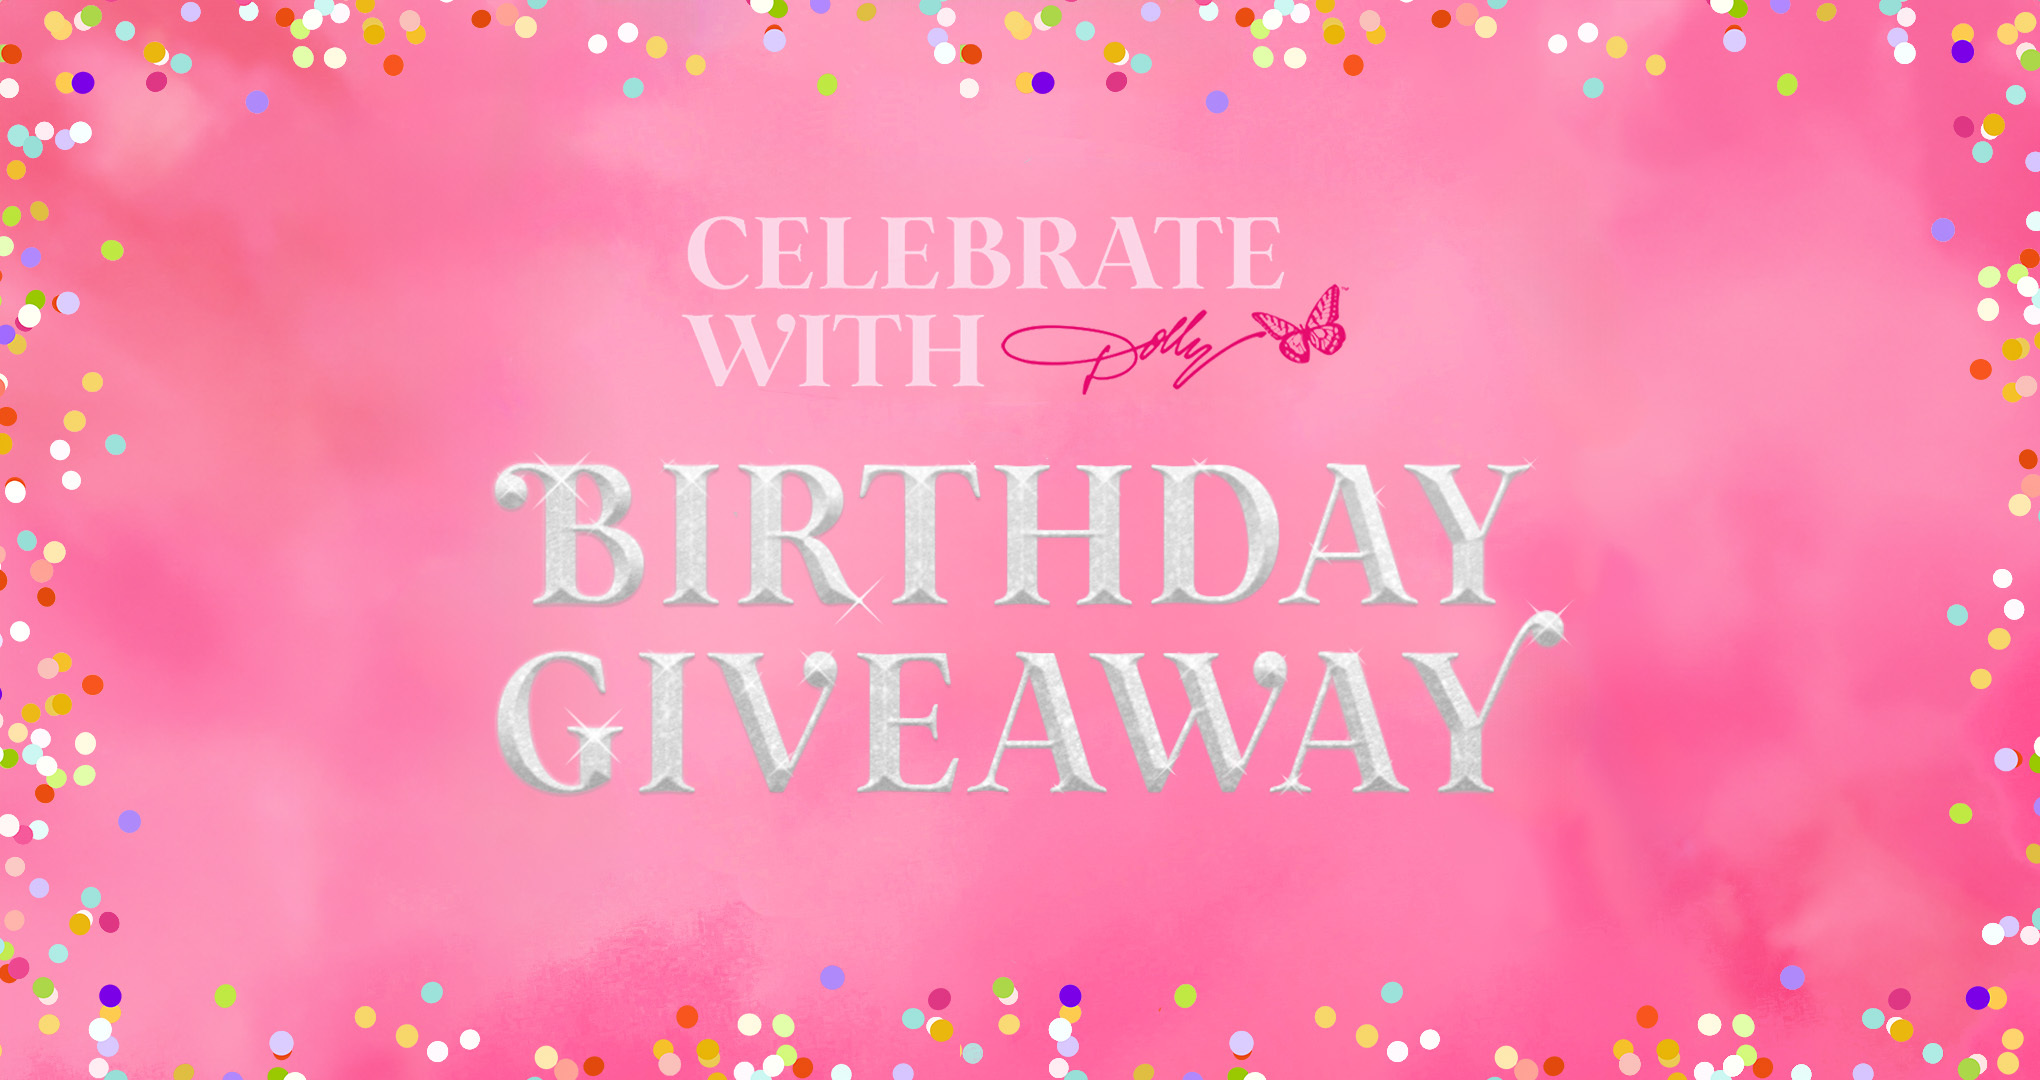 Celebrate with Dolly Birthday Giveaway